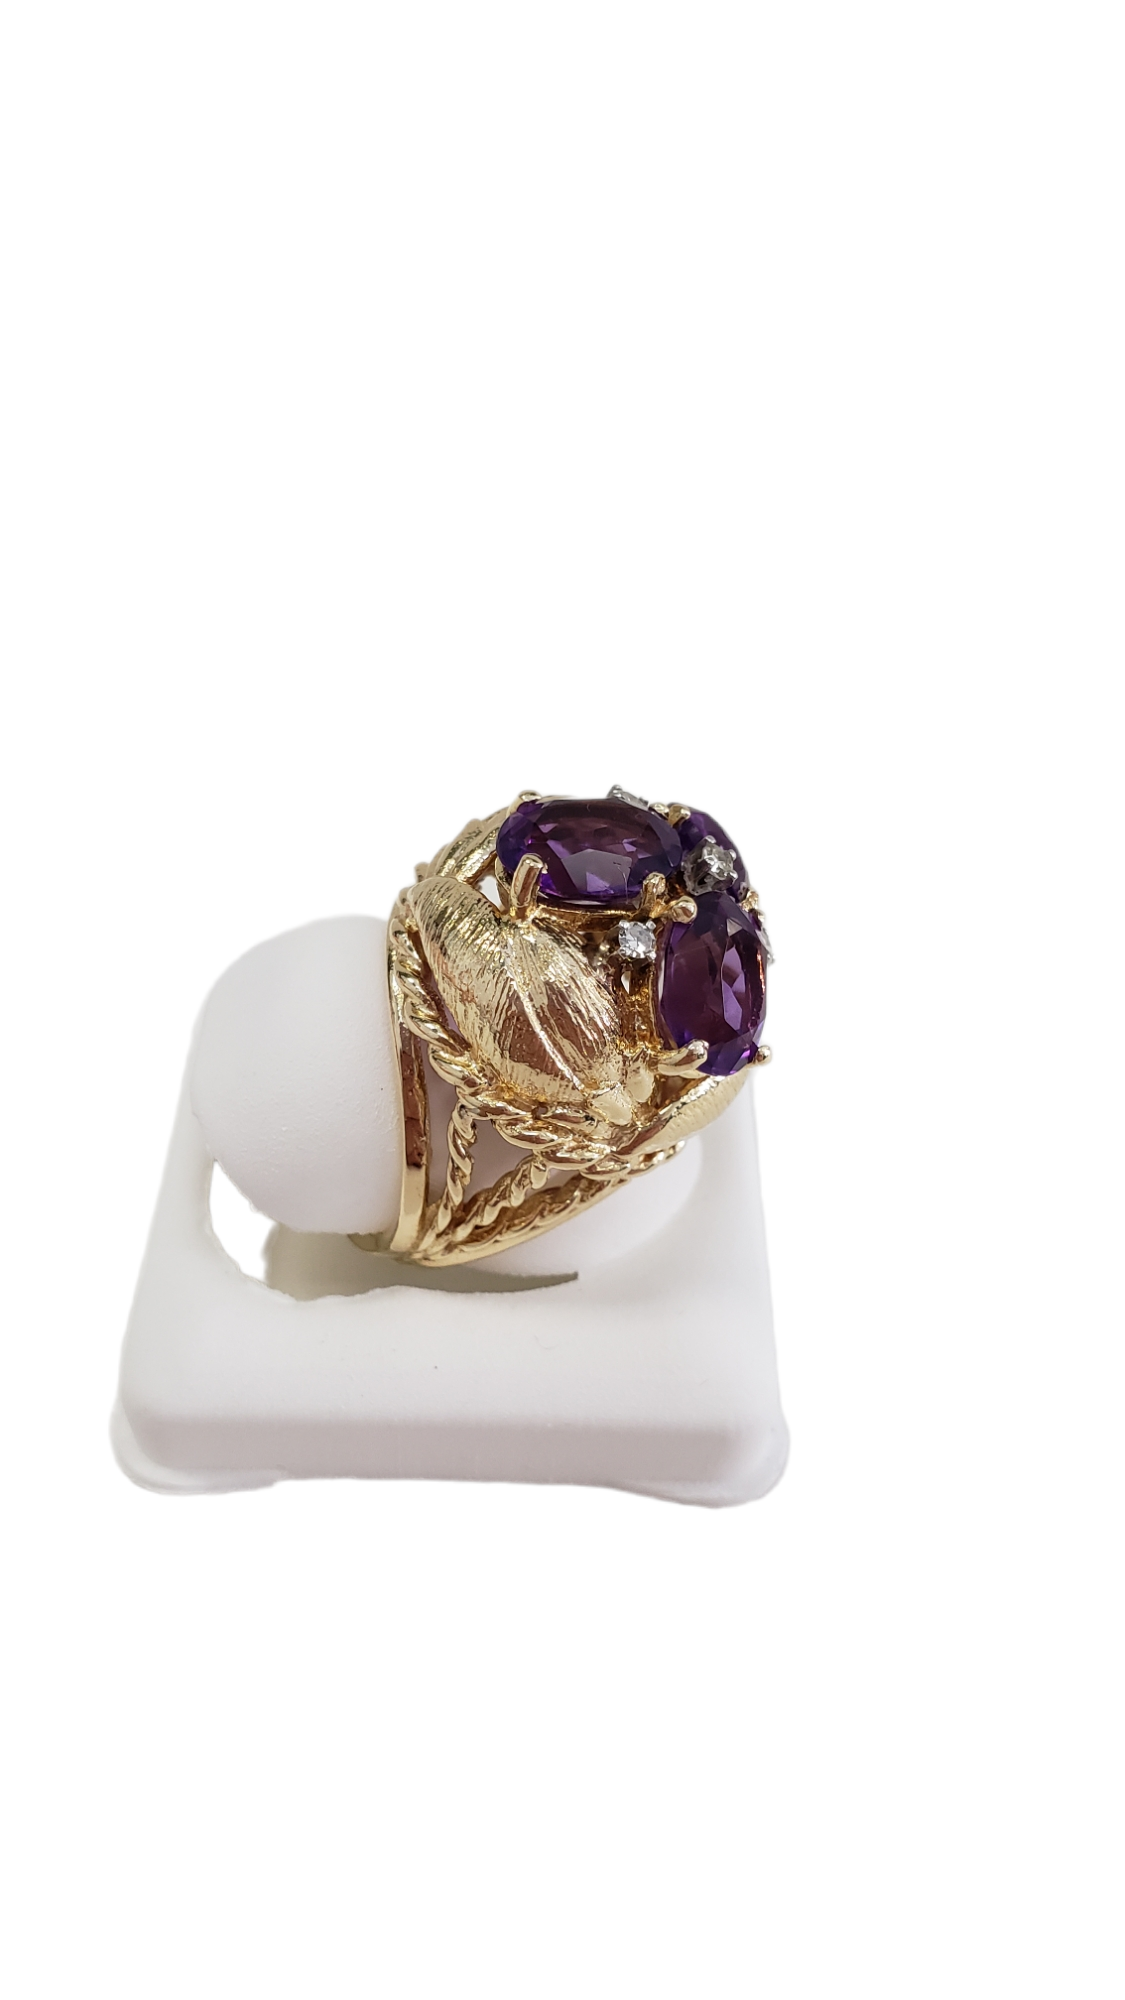 14K Yellow Gold Amethyst and Diamond Ring Size 6 (US)